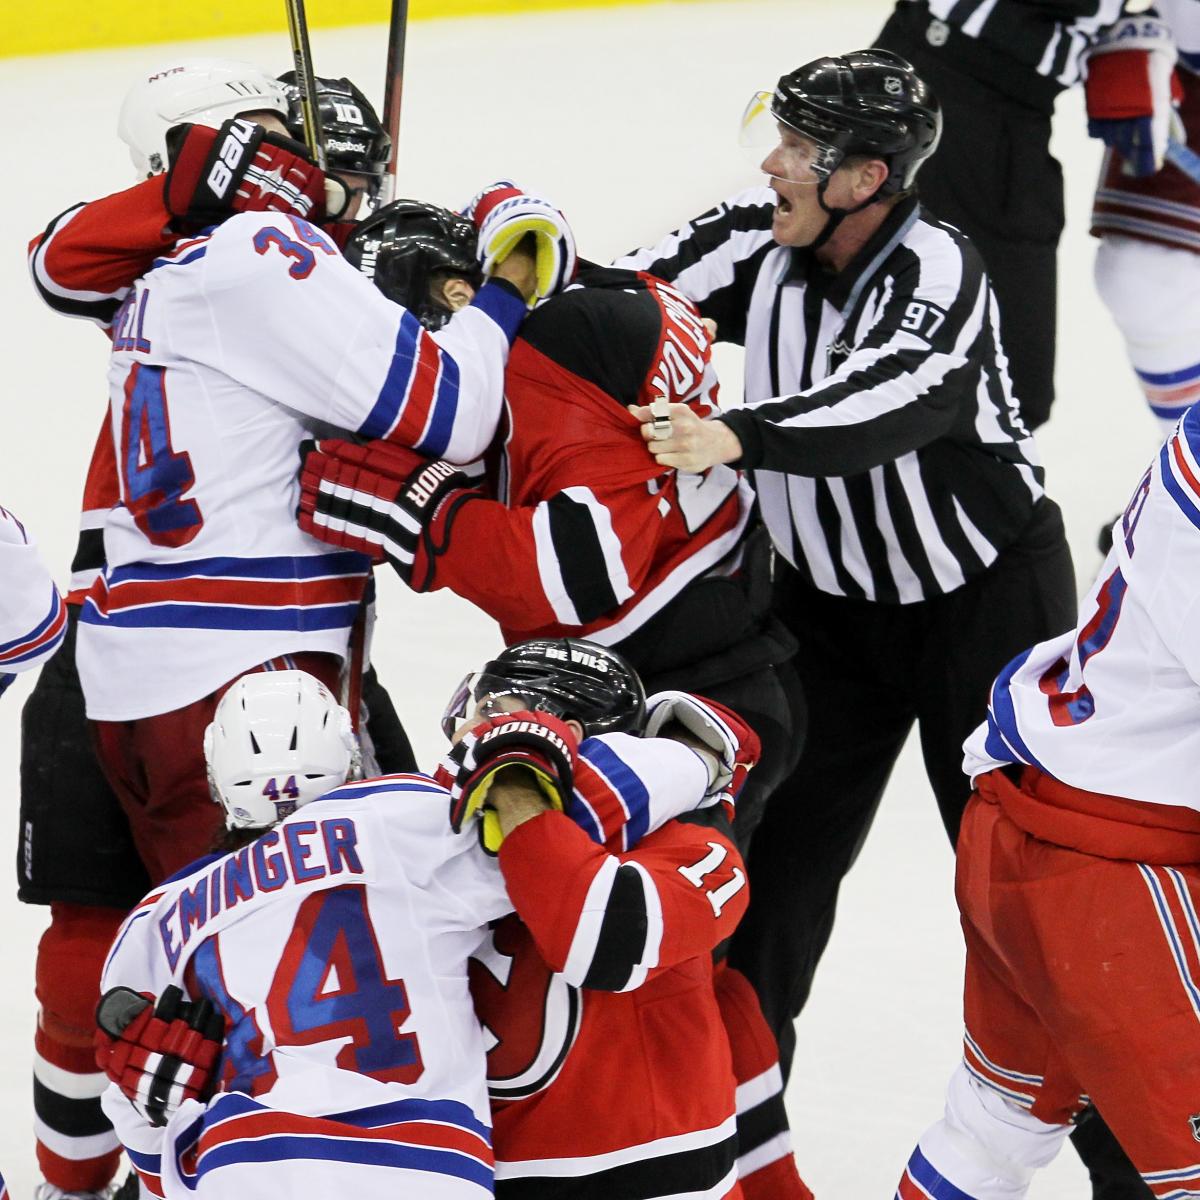 Controversy surrounding NHL's You Can Play